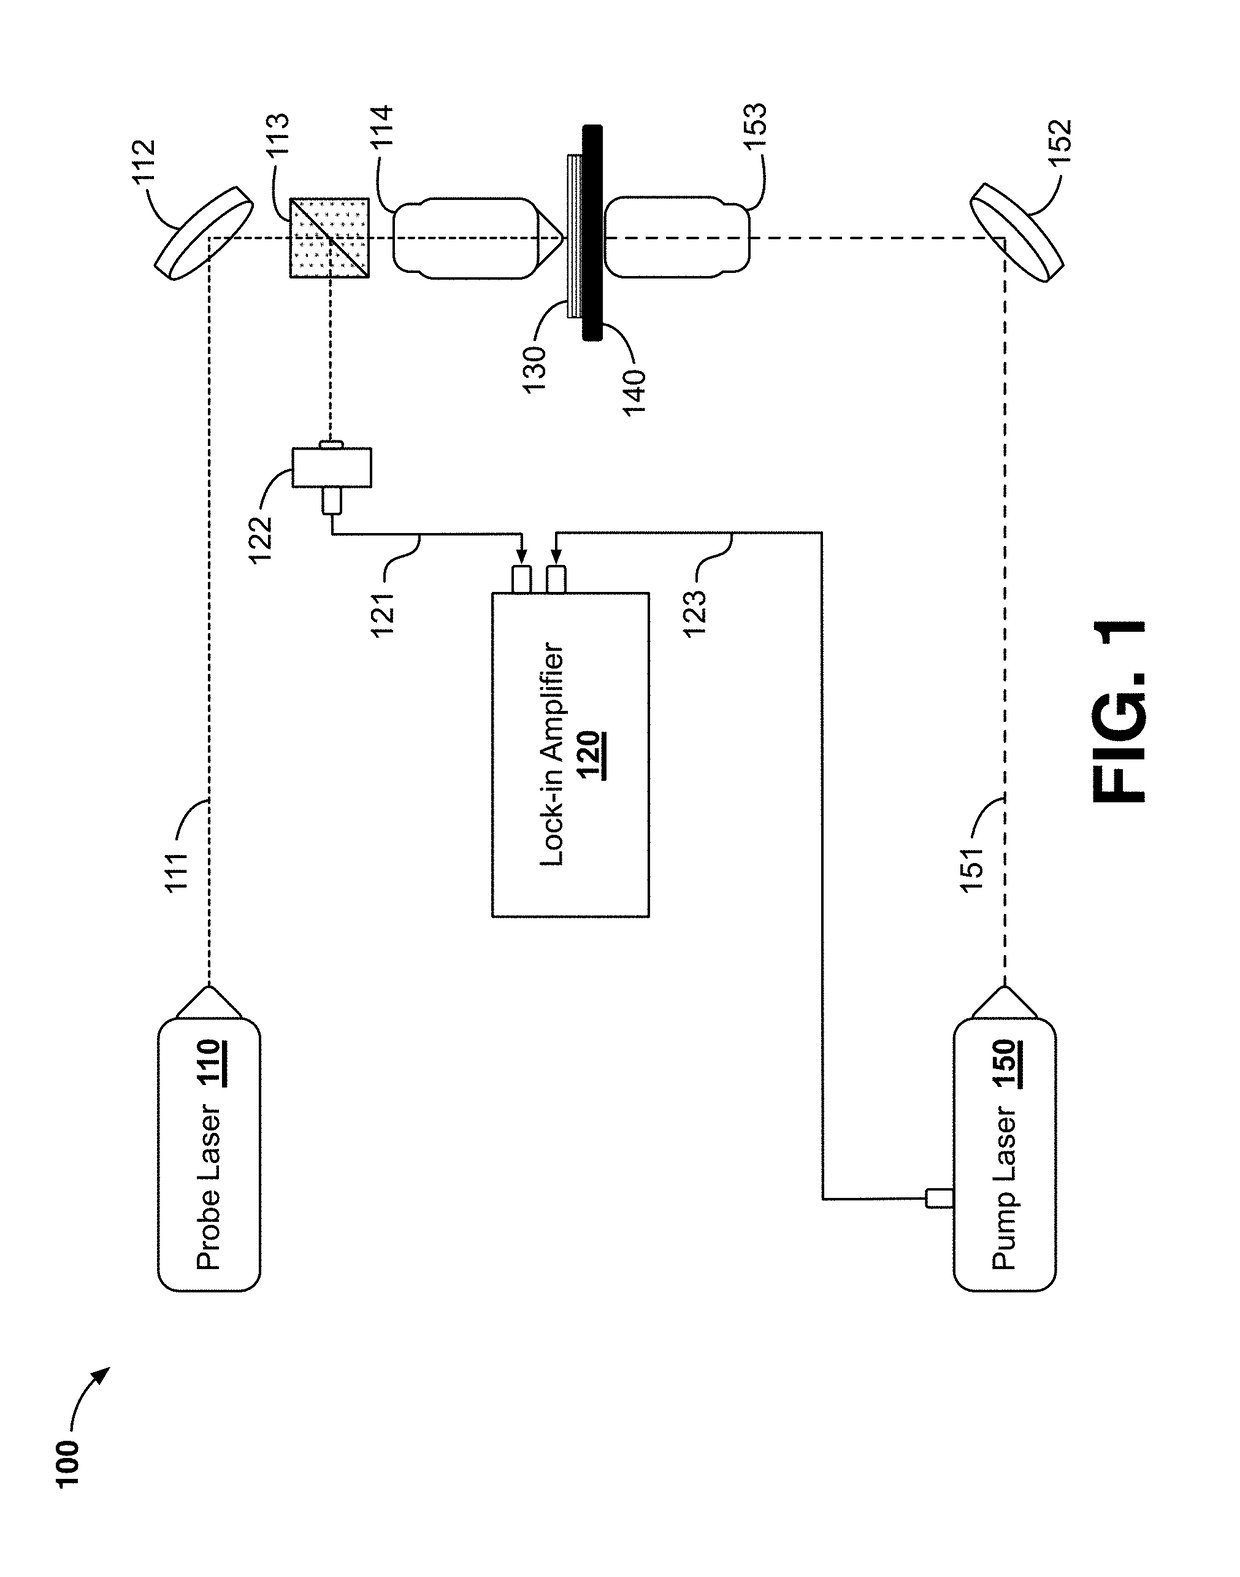 Photothermal imaging device and system